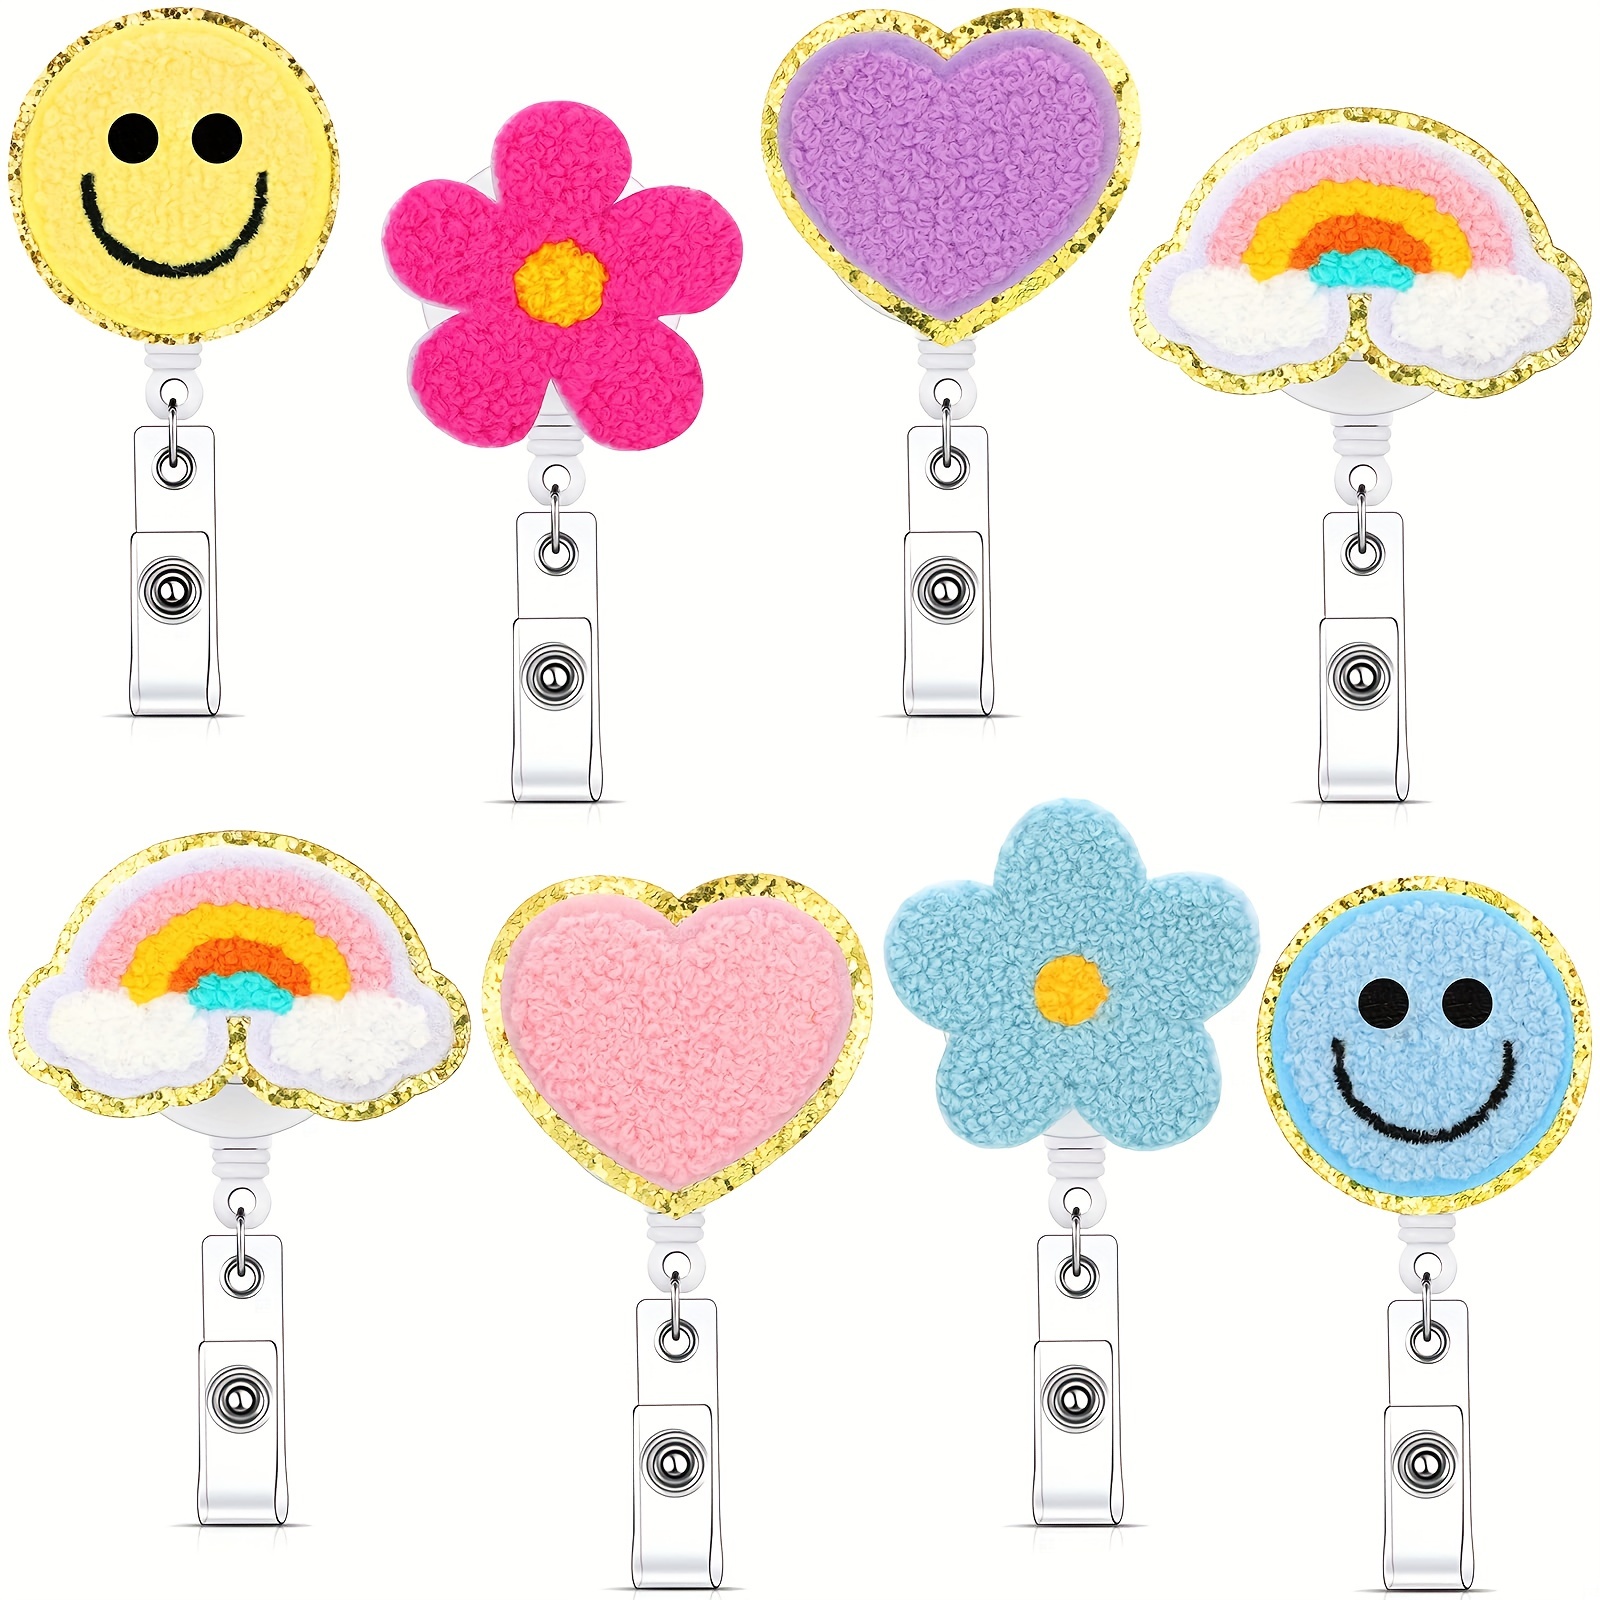 Badge Reel With Flowers for Nurse Purple Floral Name Clip for 